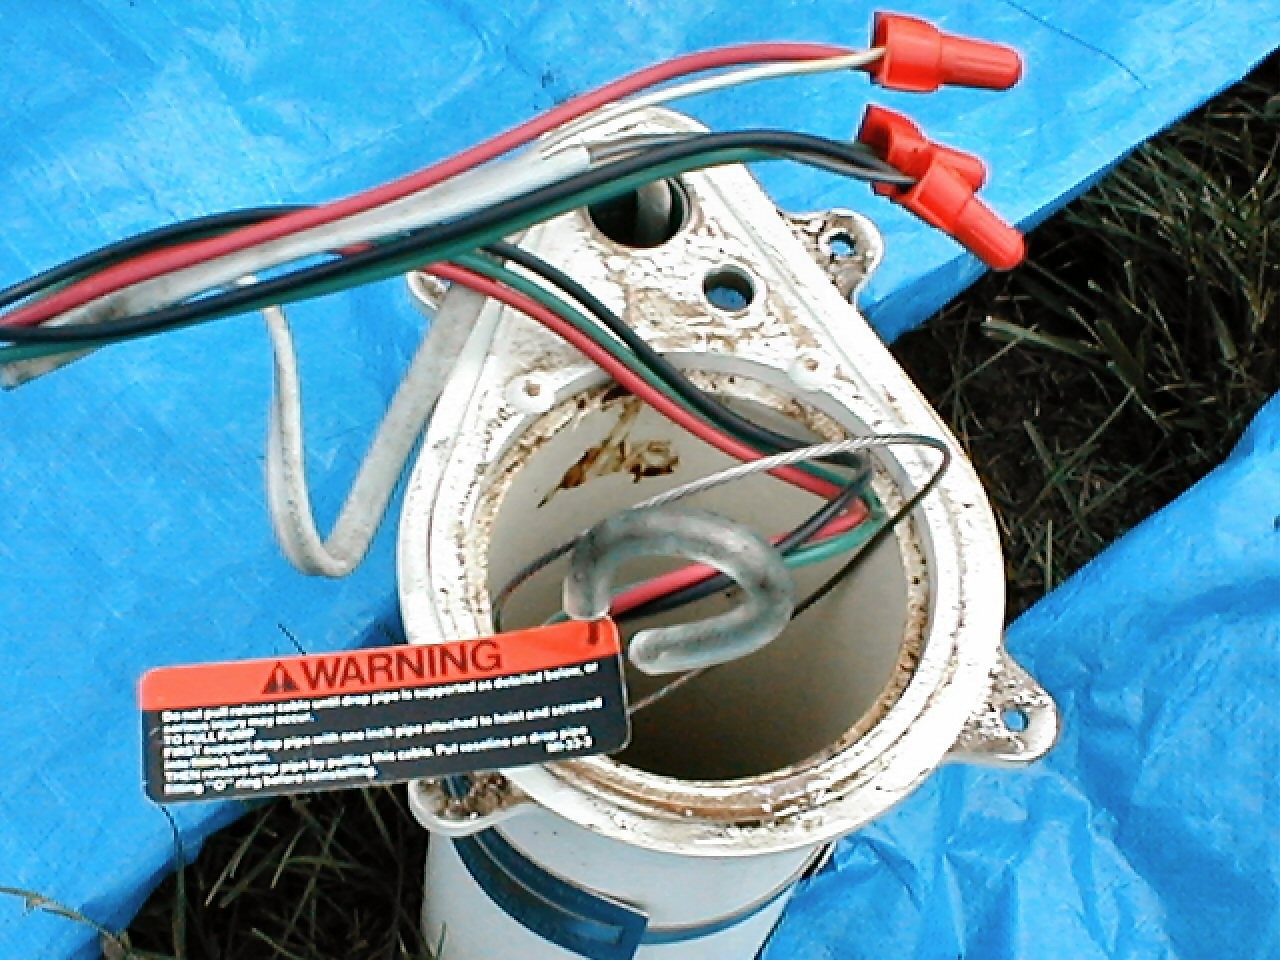 Wires with connector caps showing outside well casing.